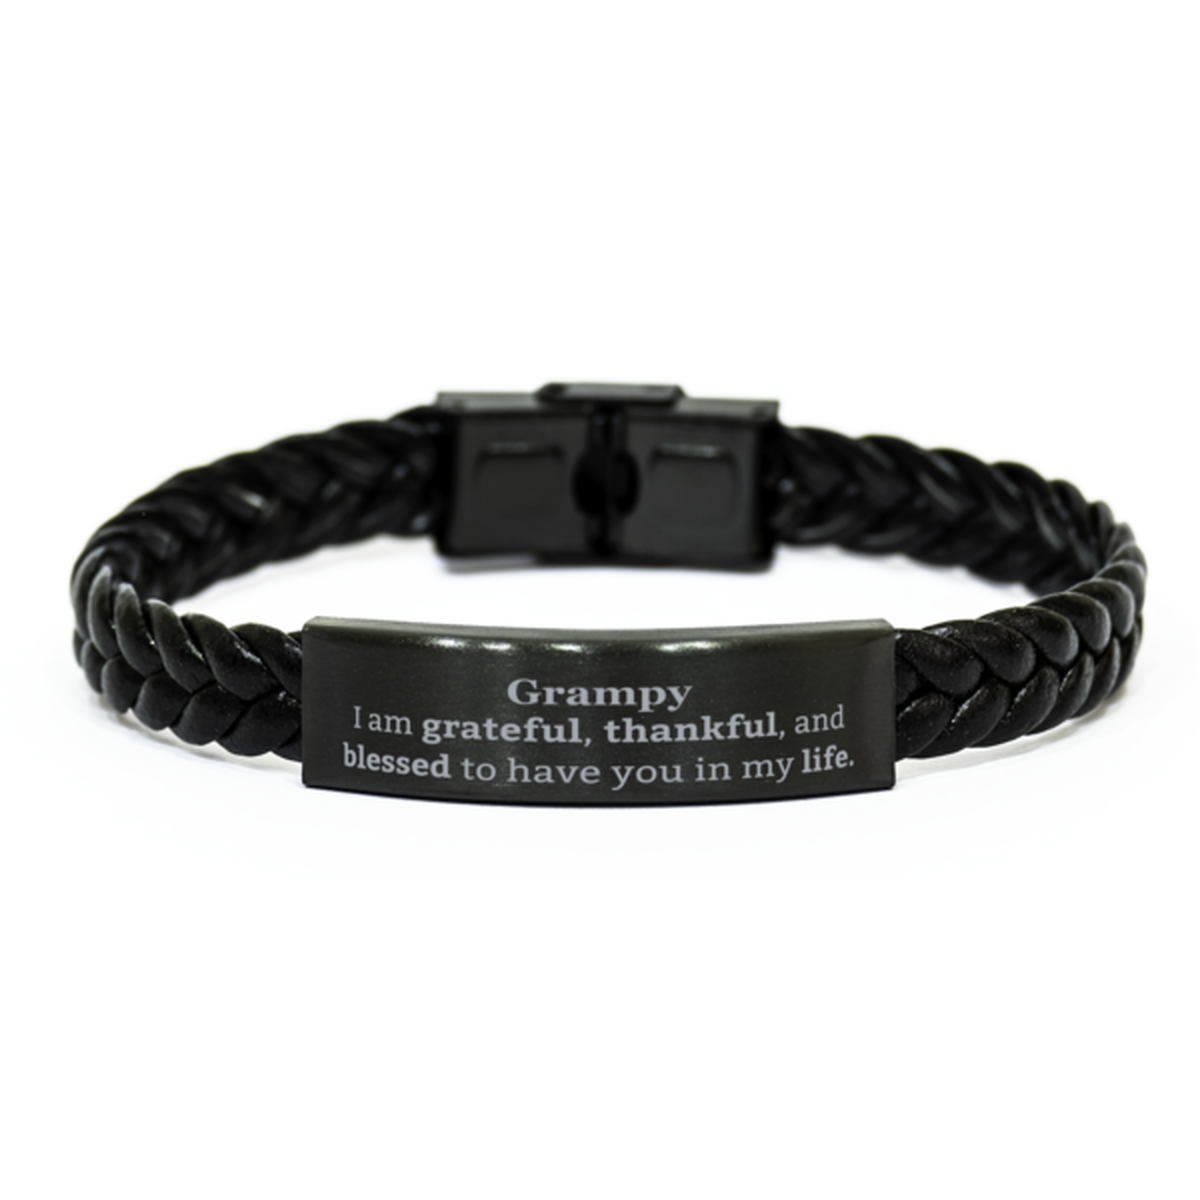 Grampy Appreciation Gifts, I am grateful, thankful, and blessed, Thank You Braided Leather Bracelet for Grampy, Birthday Inspiration Gifts for Grampy